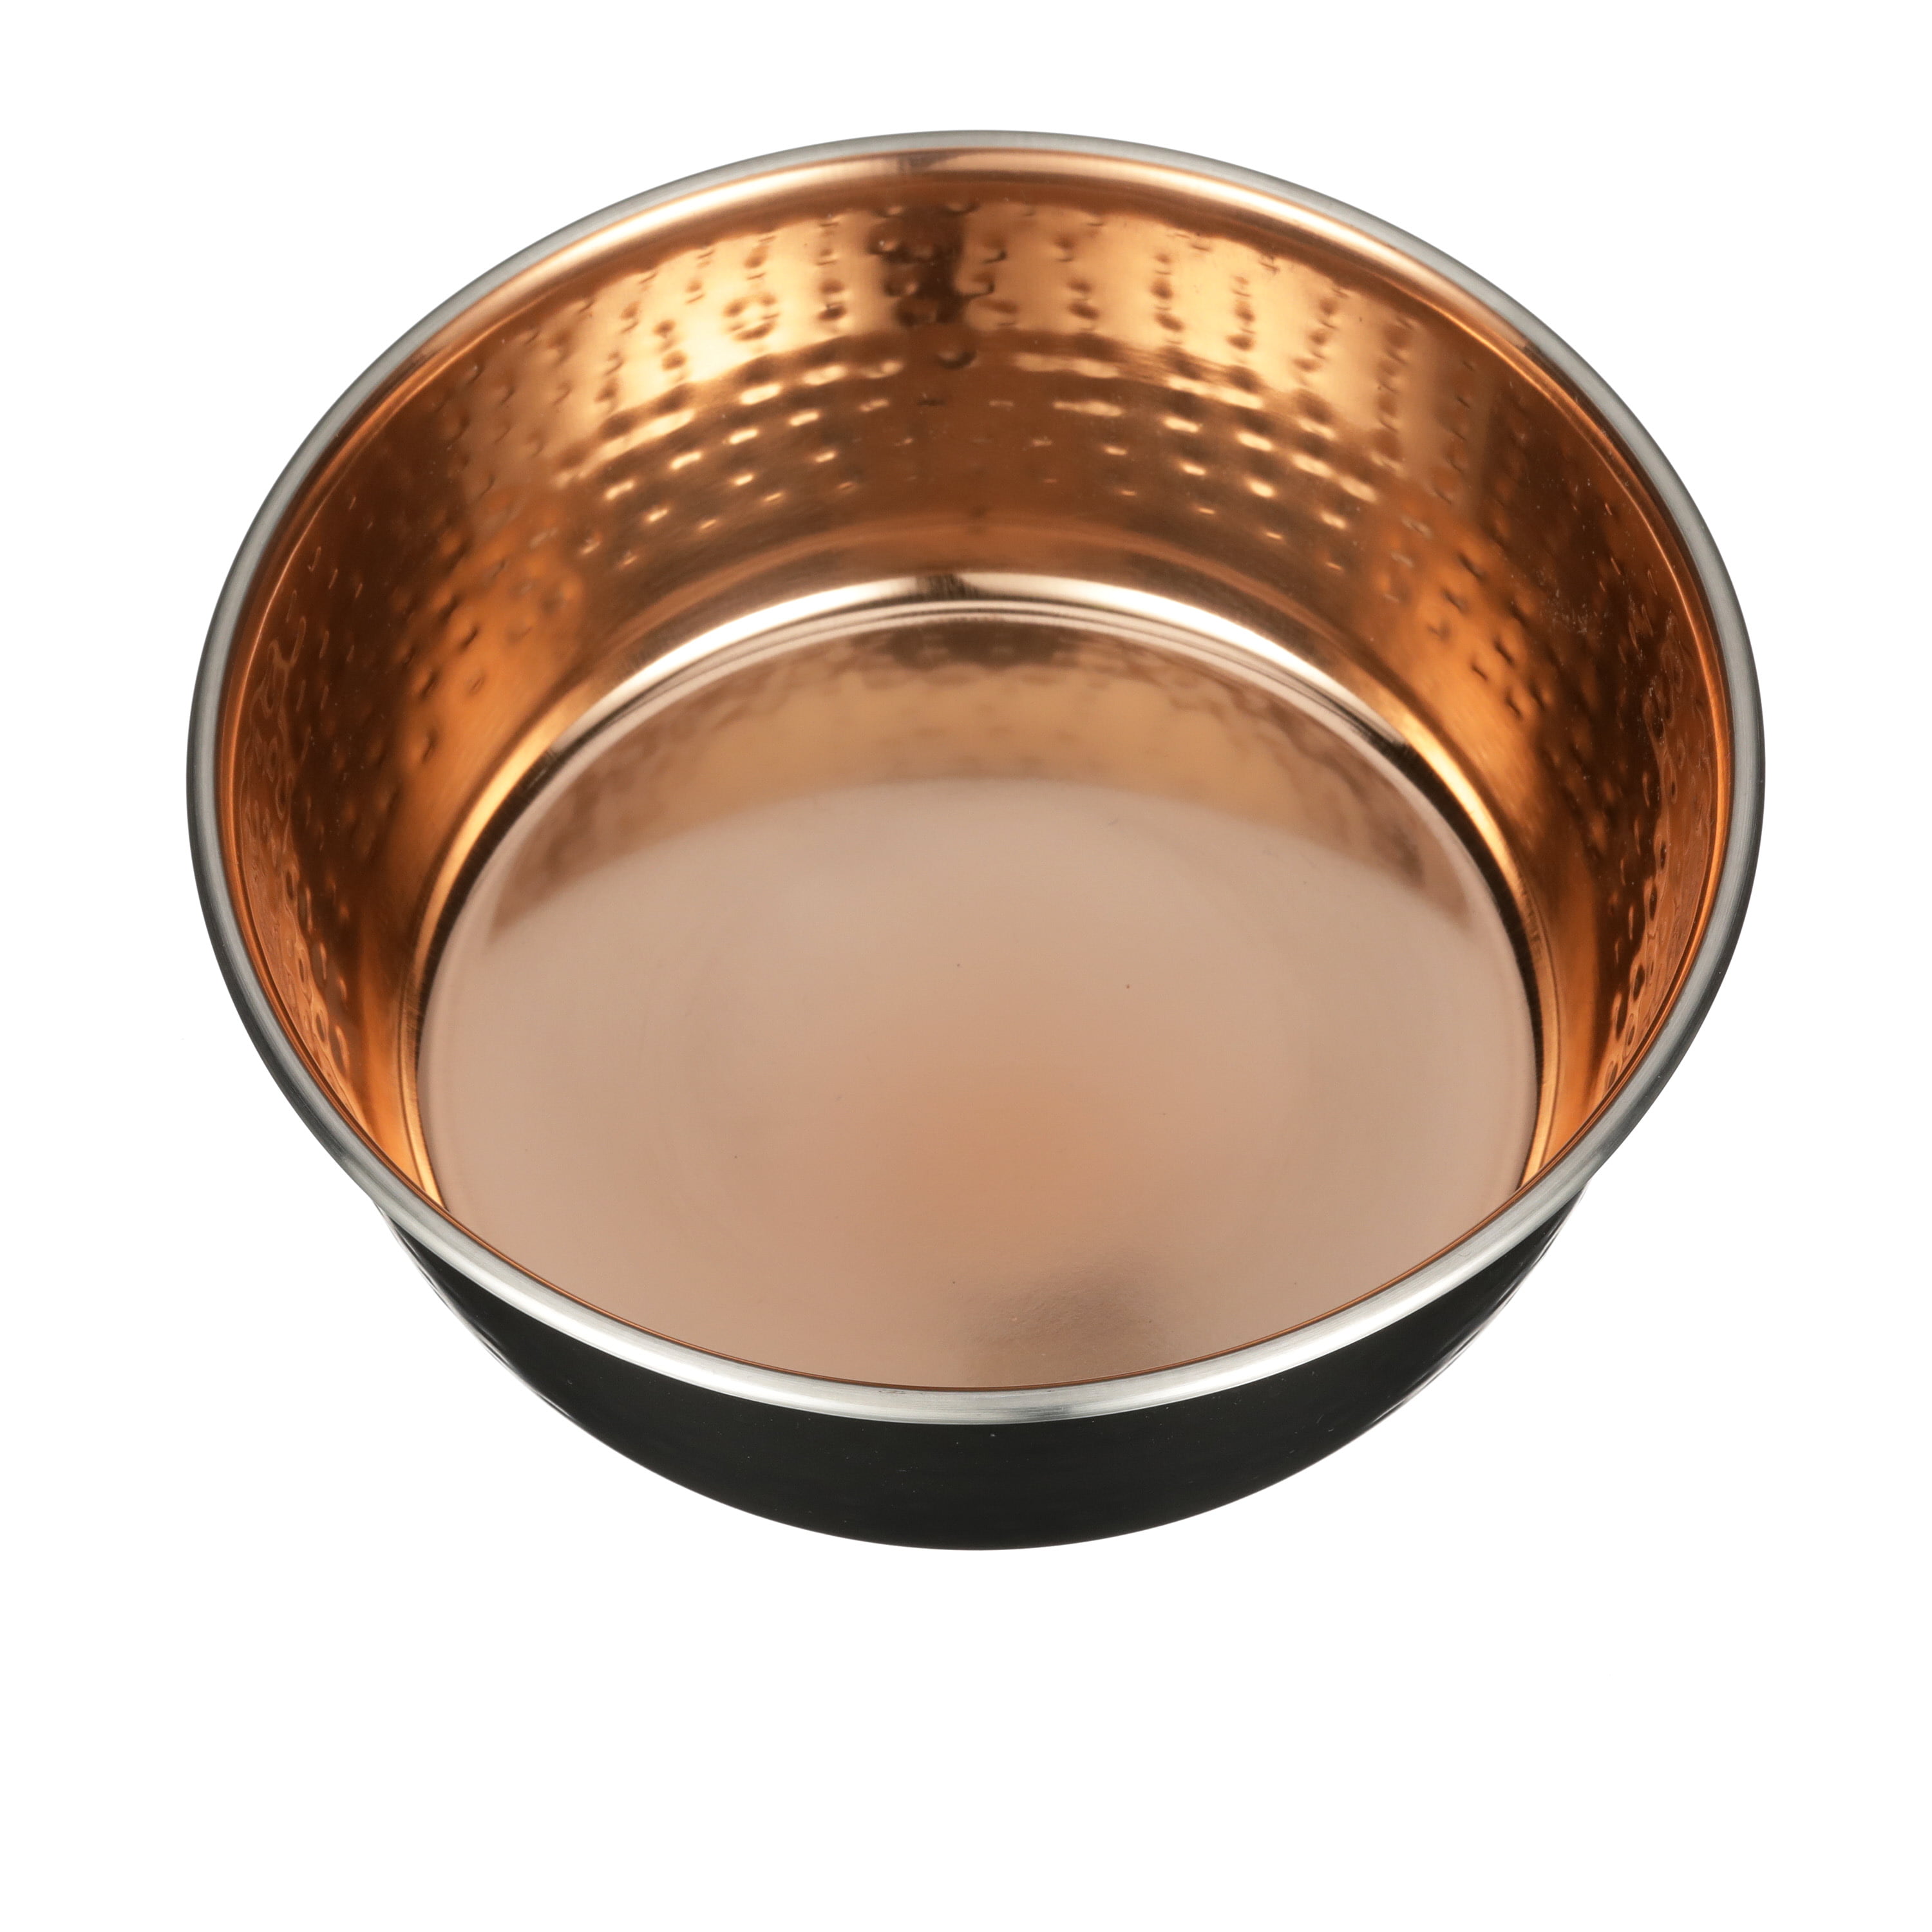 Copper Plated Water Pet Bowl 32 oz. by CooperPet Copper